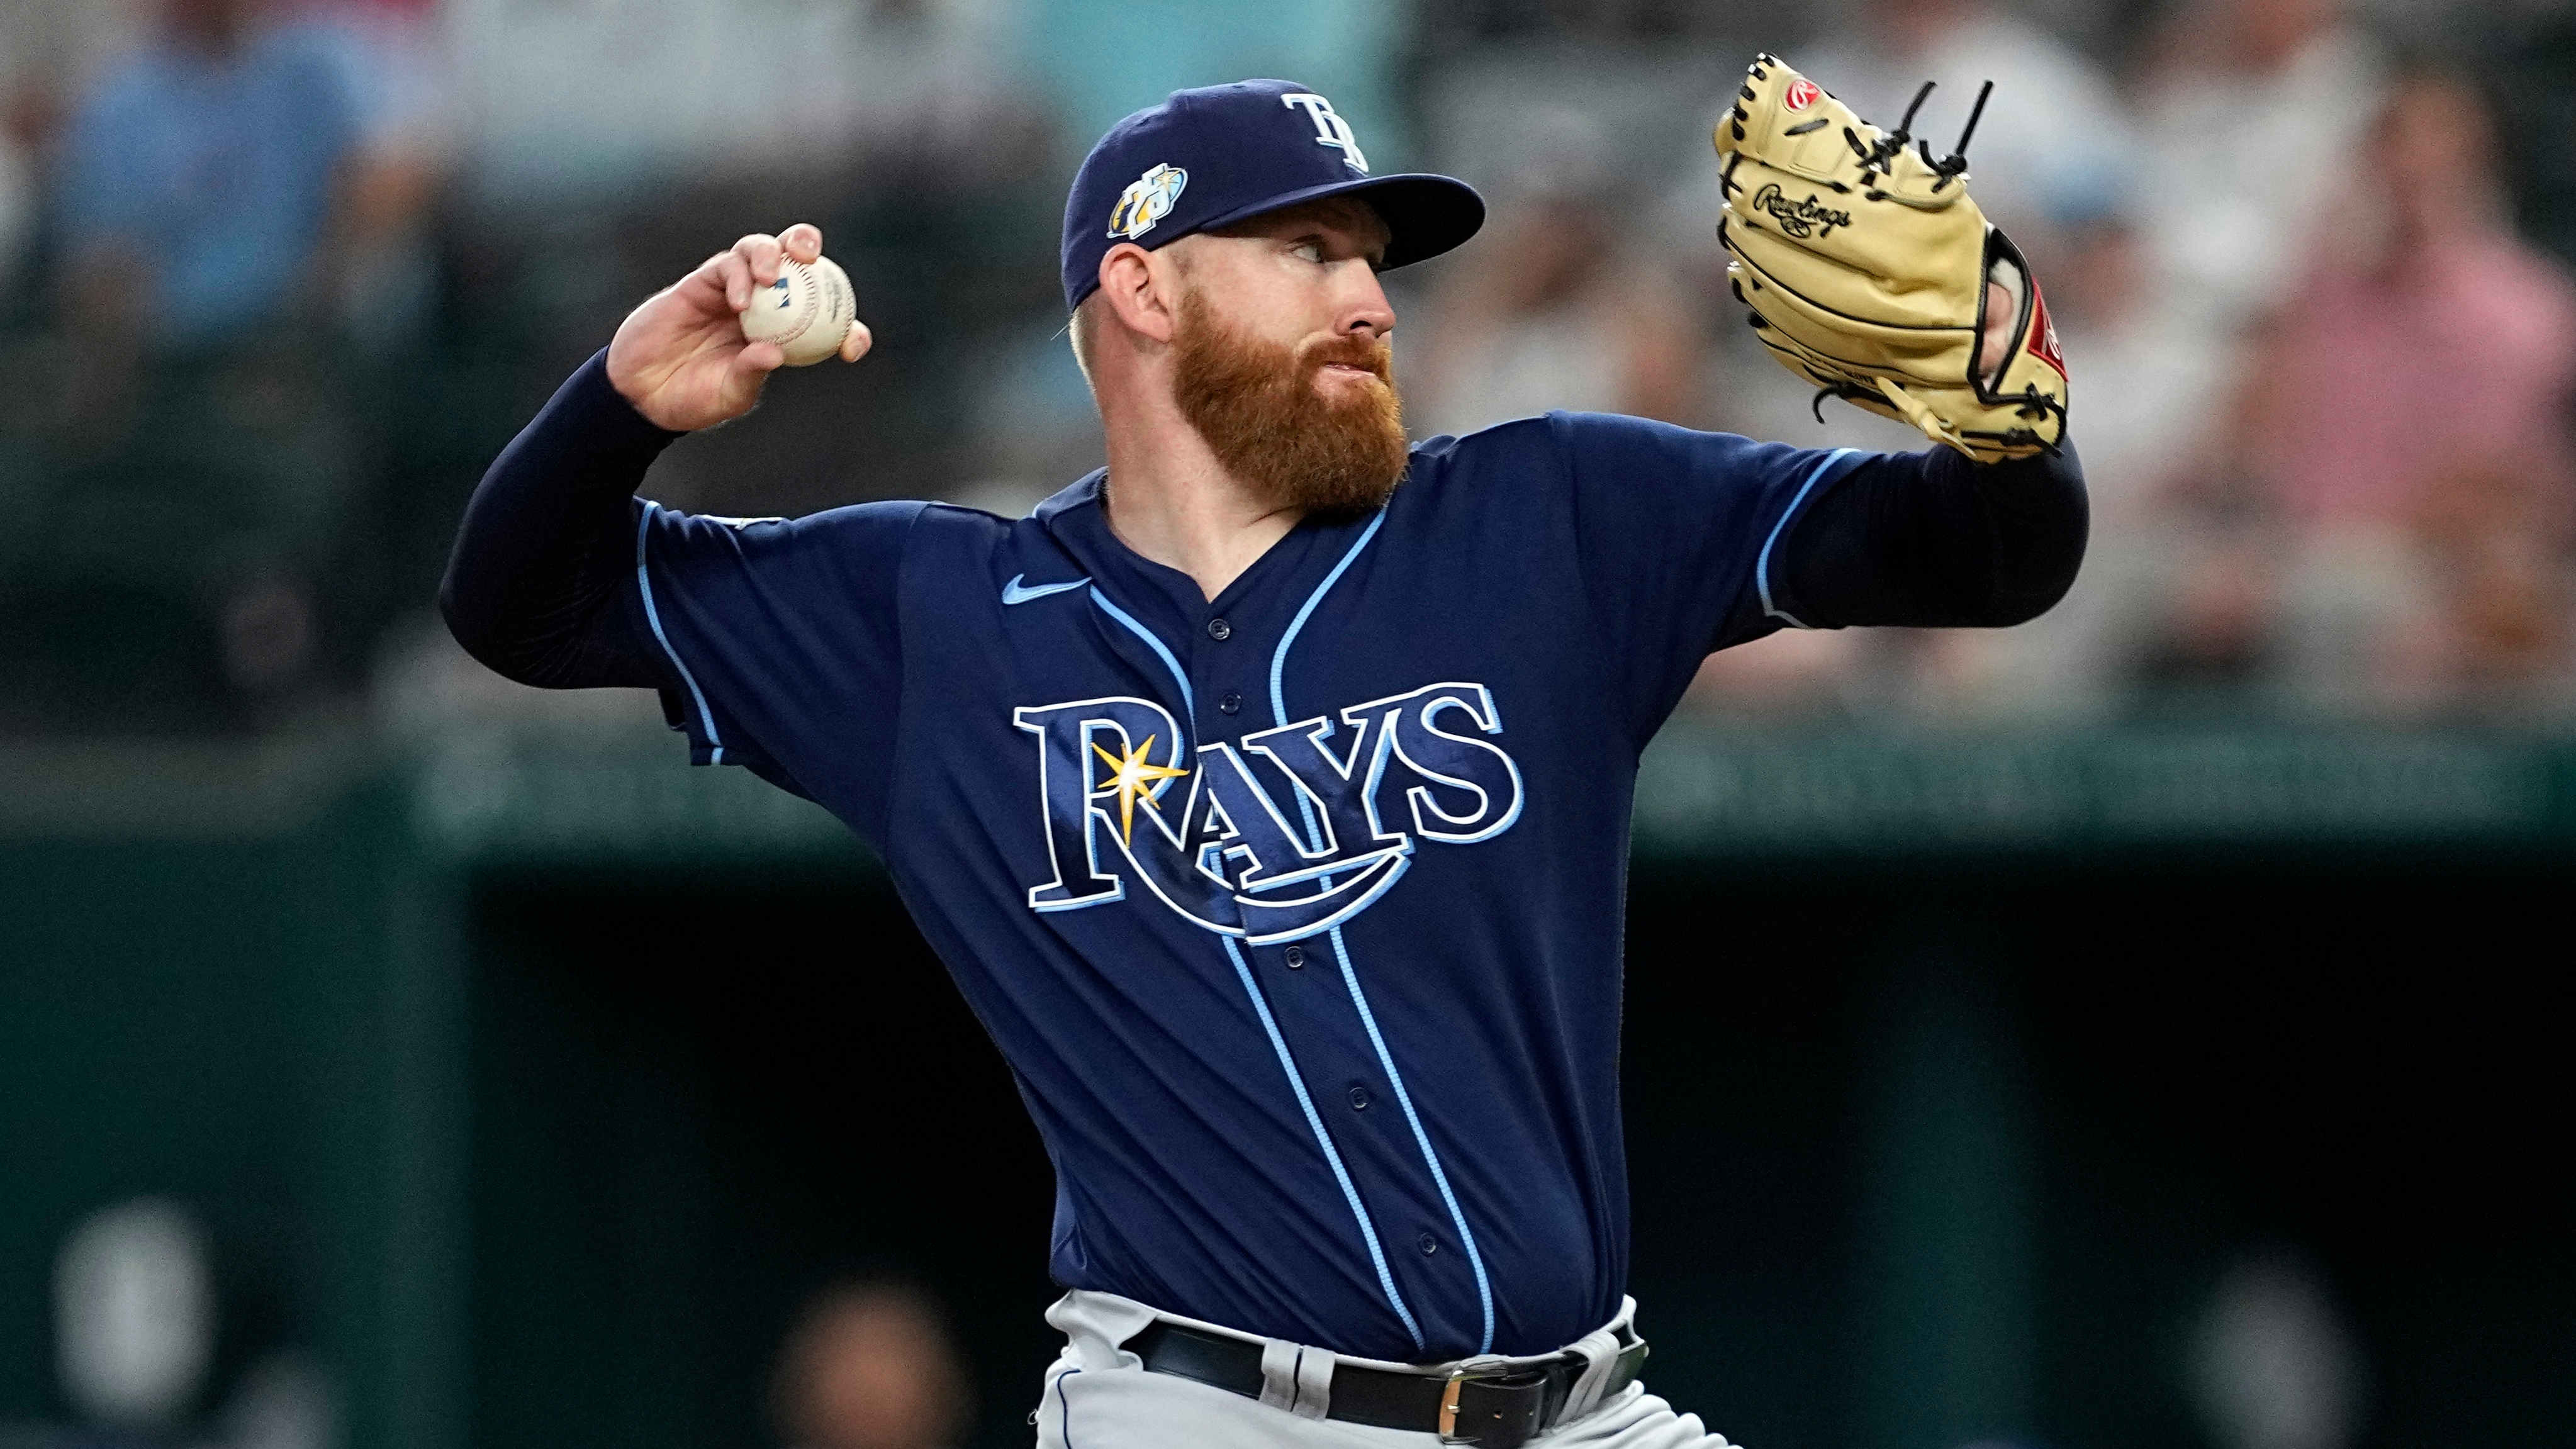 Jose Siri, Zack Littell team up to deliver Rays a win in series